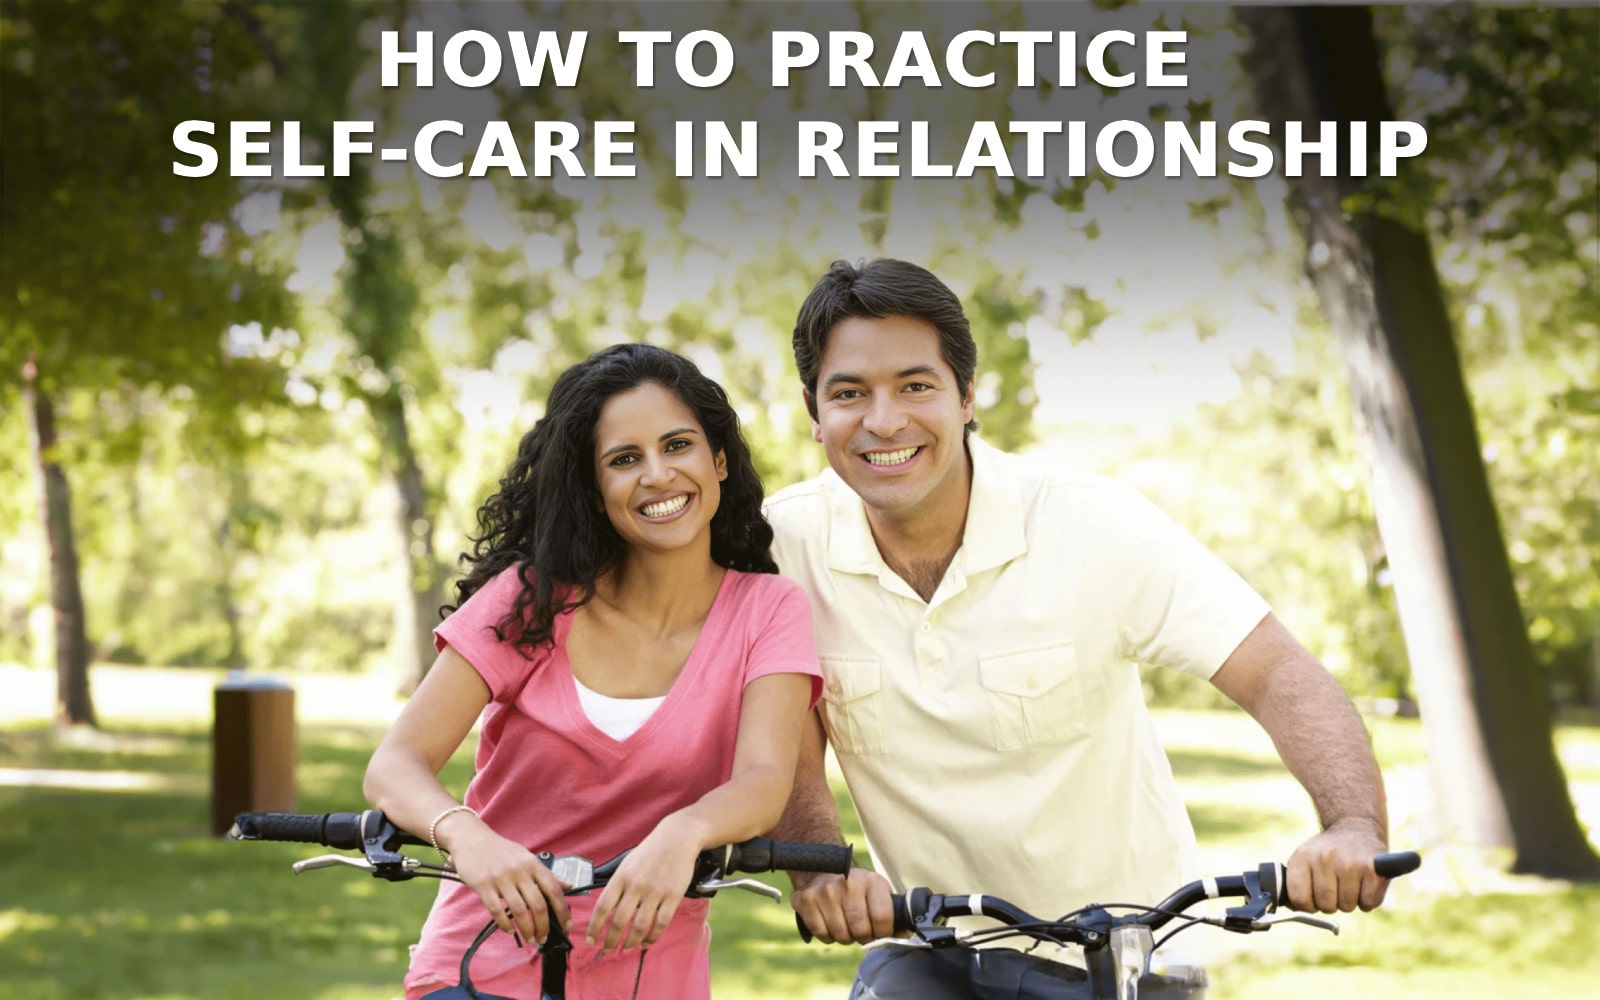 How to Practice Self-Care in Relationship